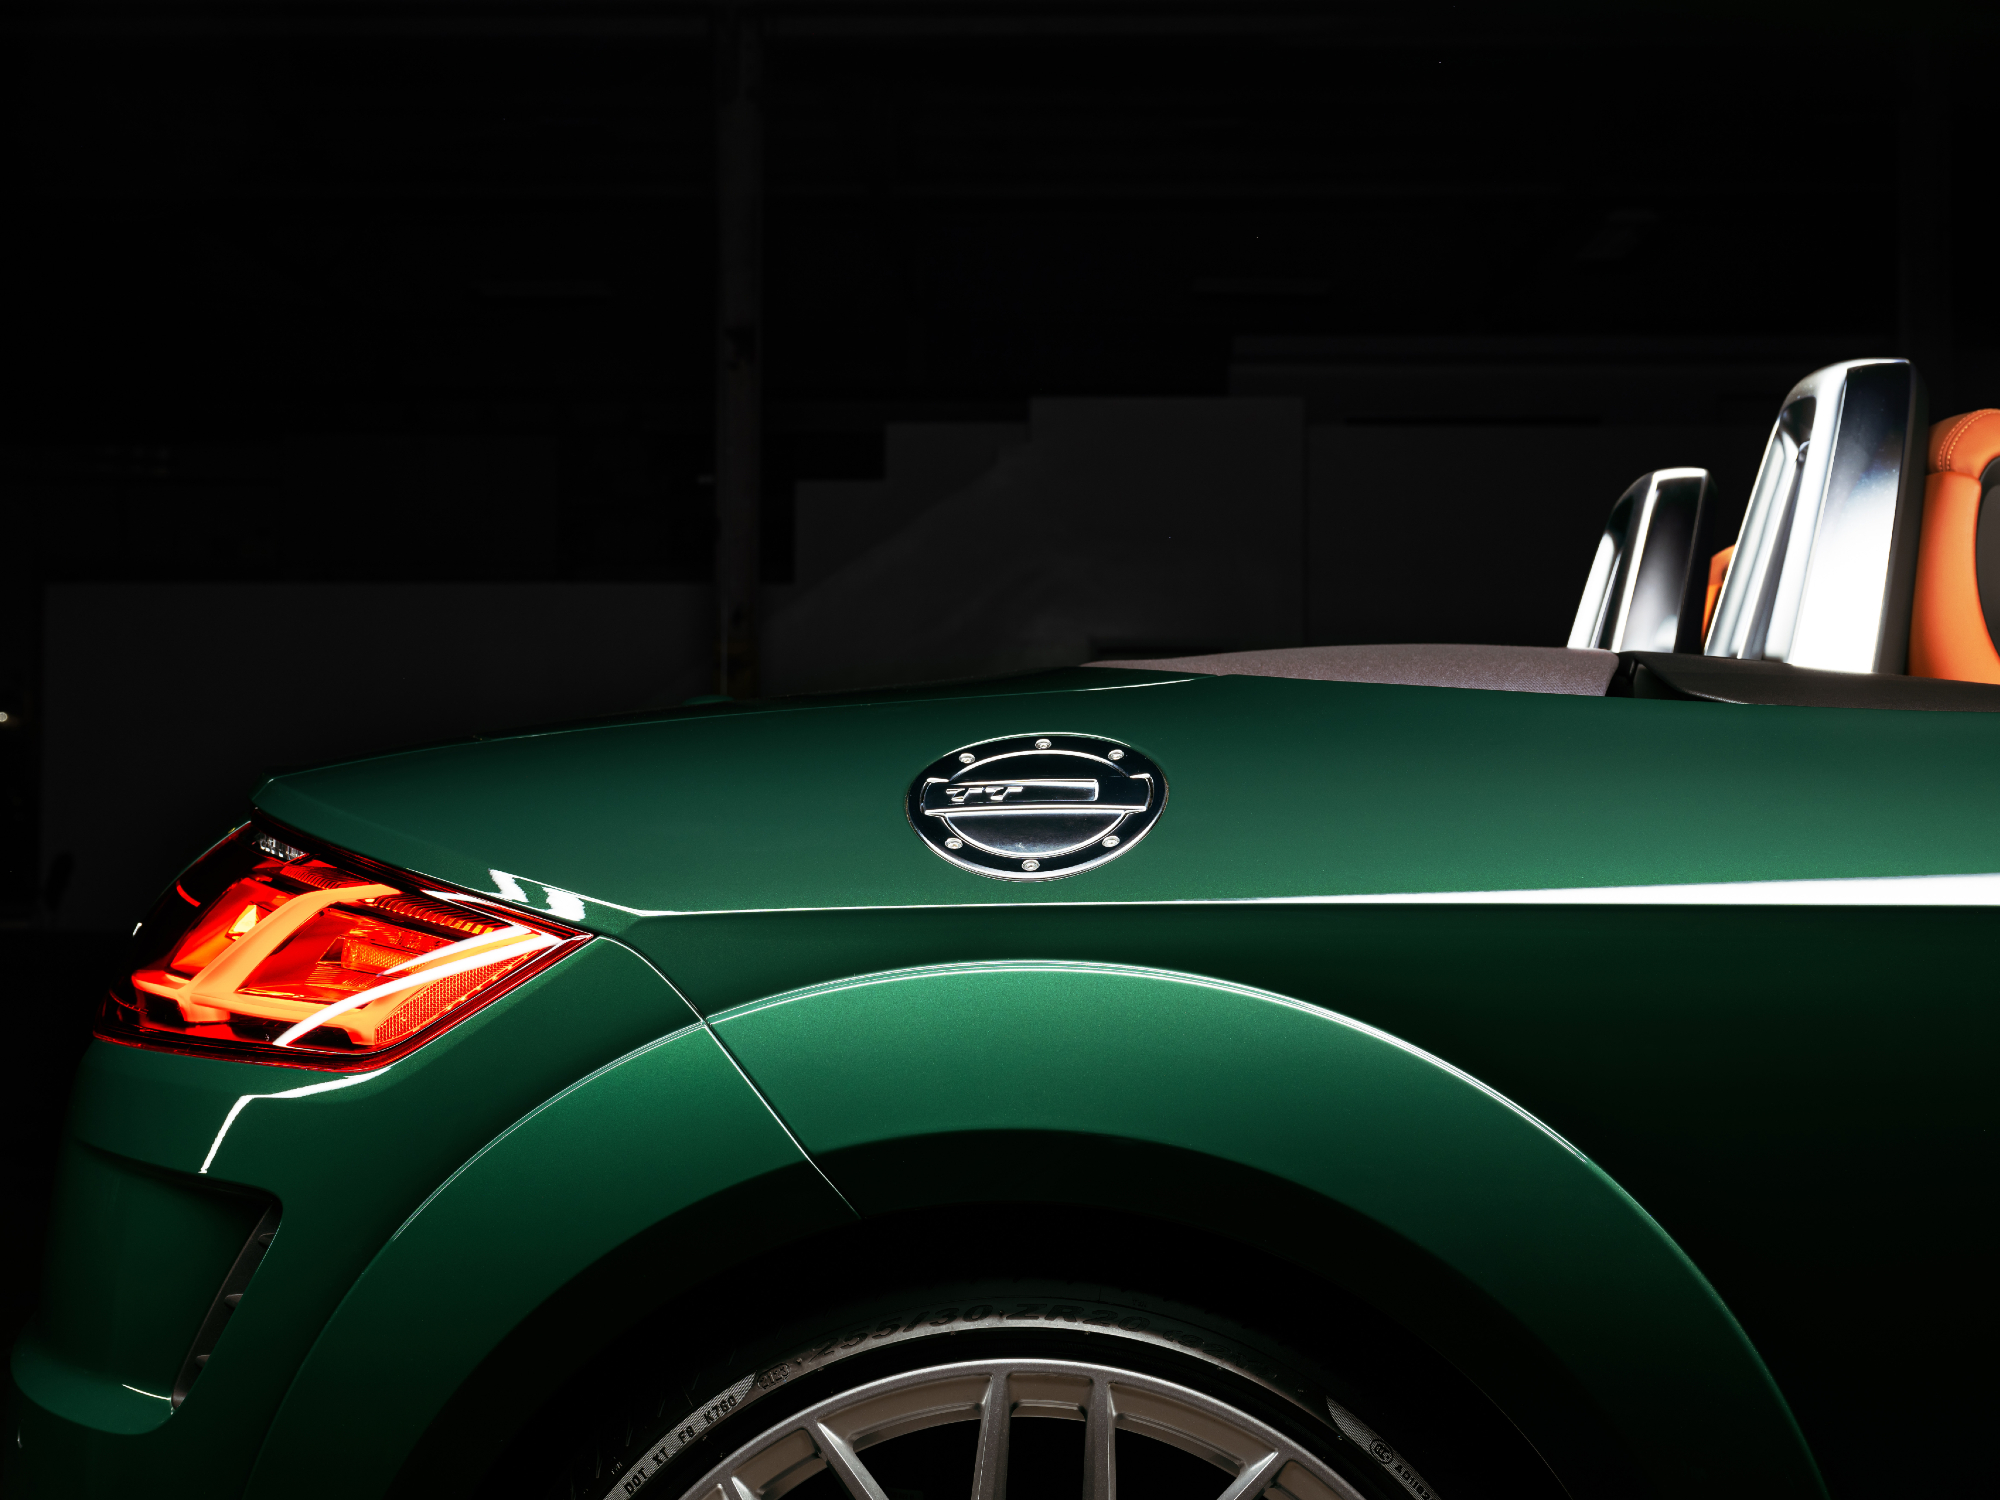 https://www.themanual.com/wp-content/uploads/sites/9/2023/11/2023-Audi-TT-Roadster-Final-Edition-view-across-the-right-rear-quarter-panel-of-the-green-car-in-an-empty-warehouse.jpg?fit=2000%2C1500&p=1